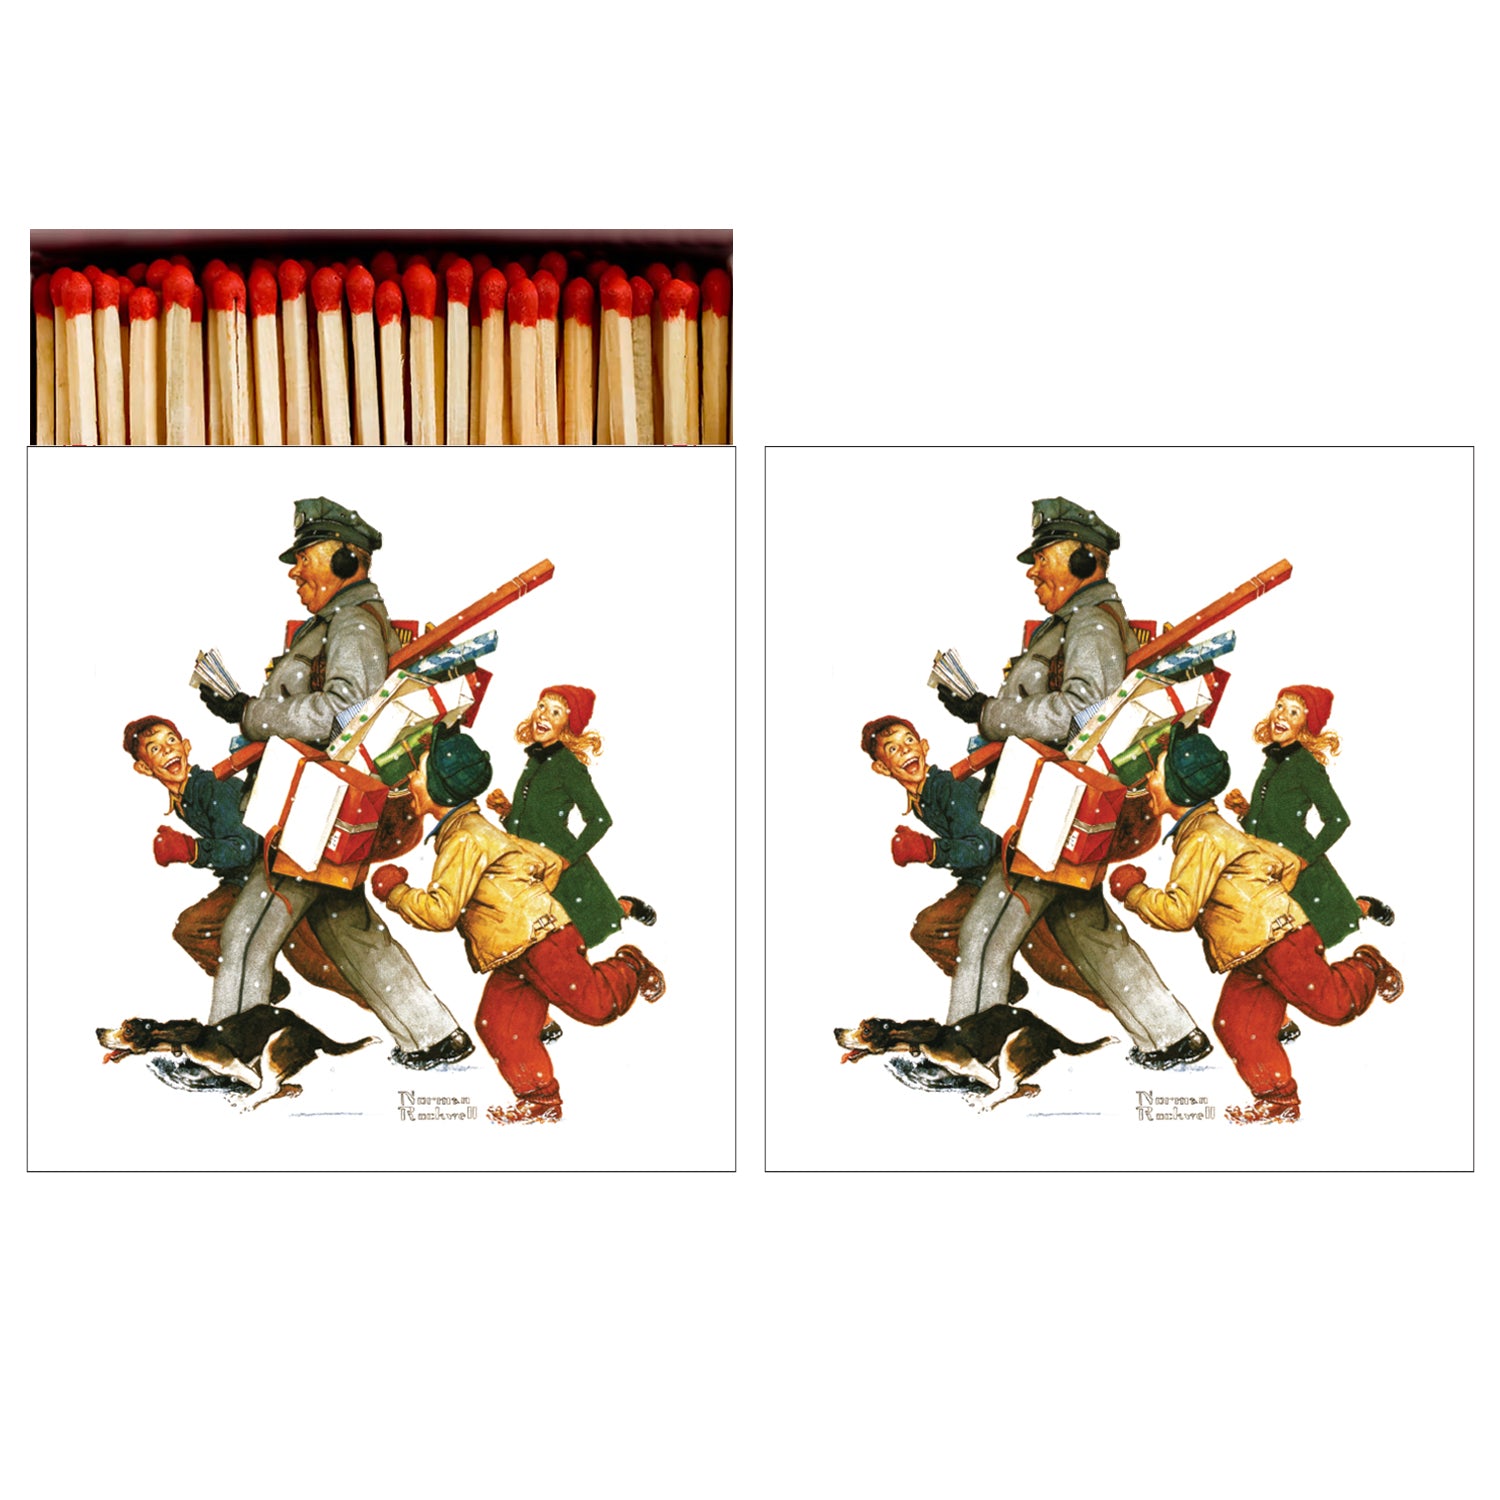 A group of Jolly Postman Matches with a man carrying a baseball bat during the holidays, made by Hester &amp; Cook.